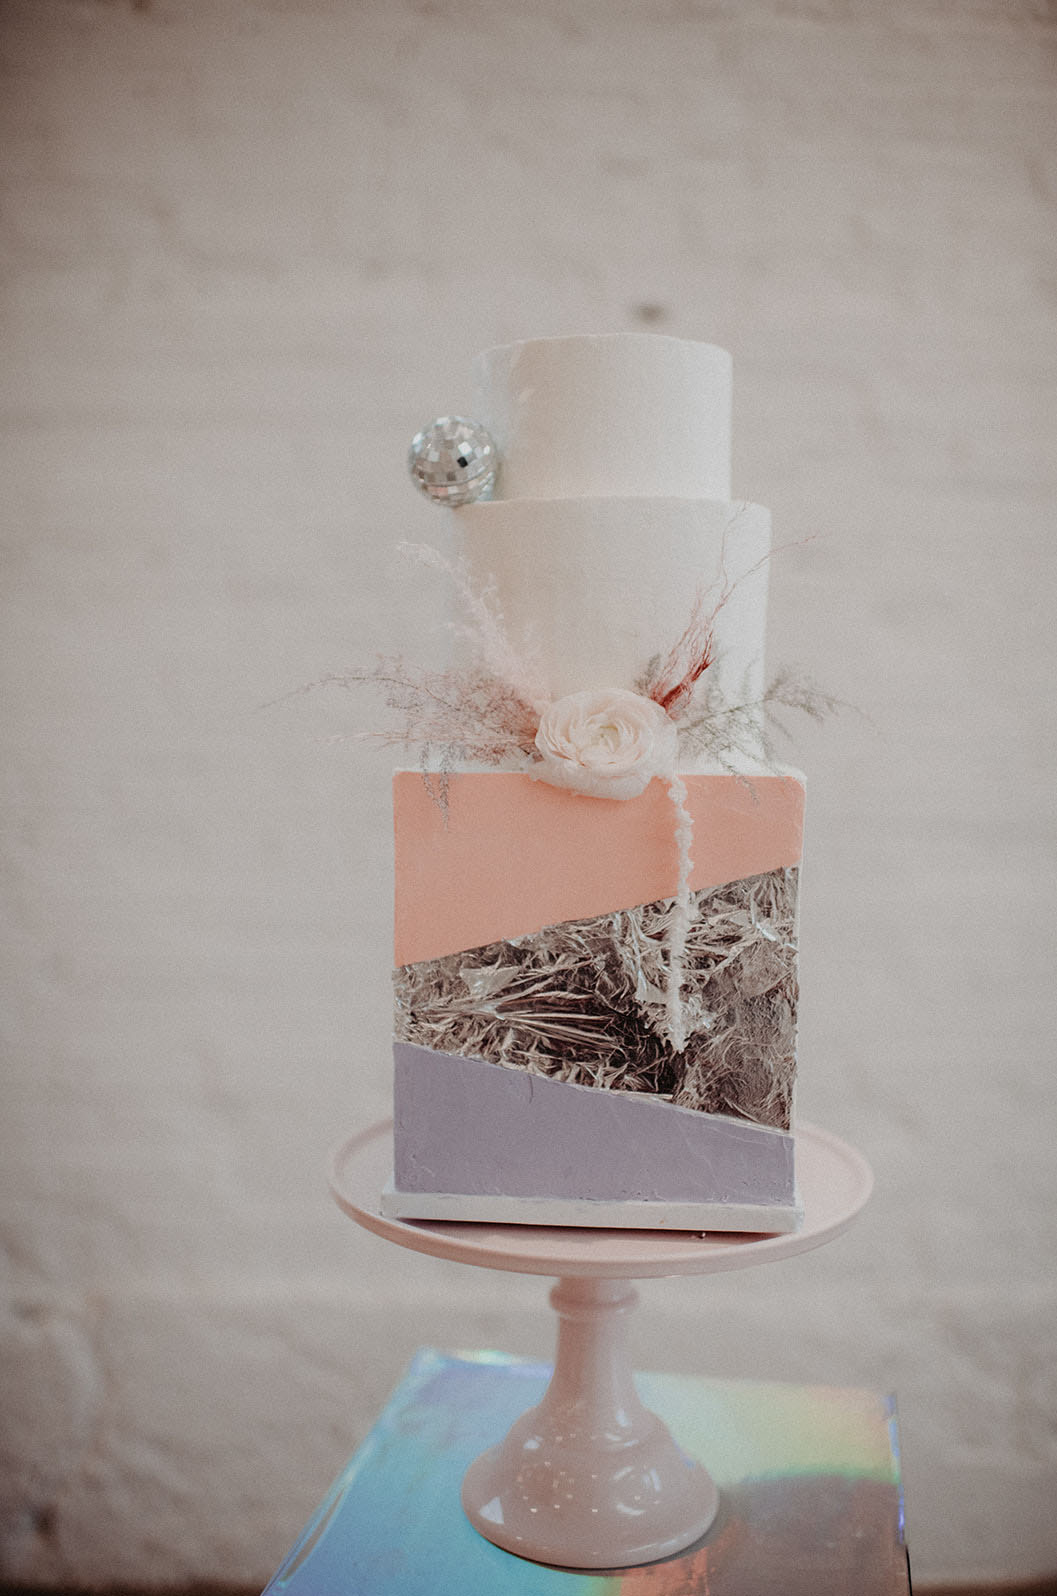 The wedding cake is a masterpiece in white, pink, lilac and silver leaf plus disco balls and blooms